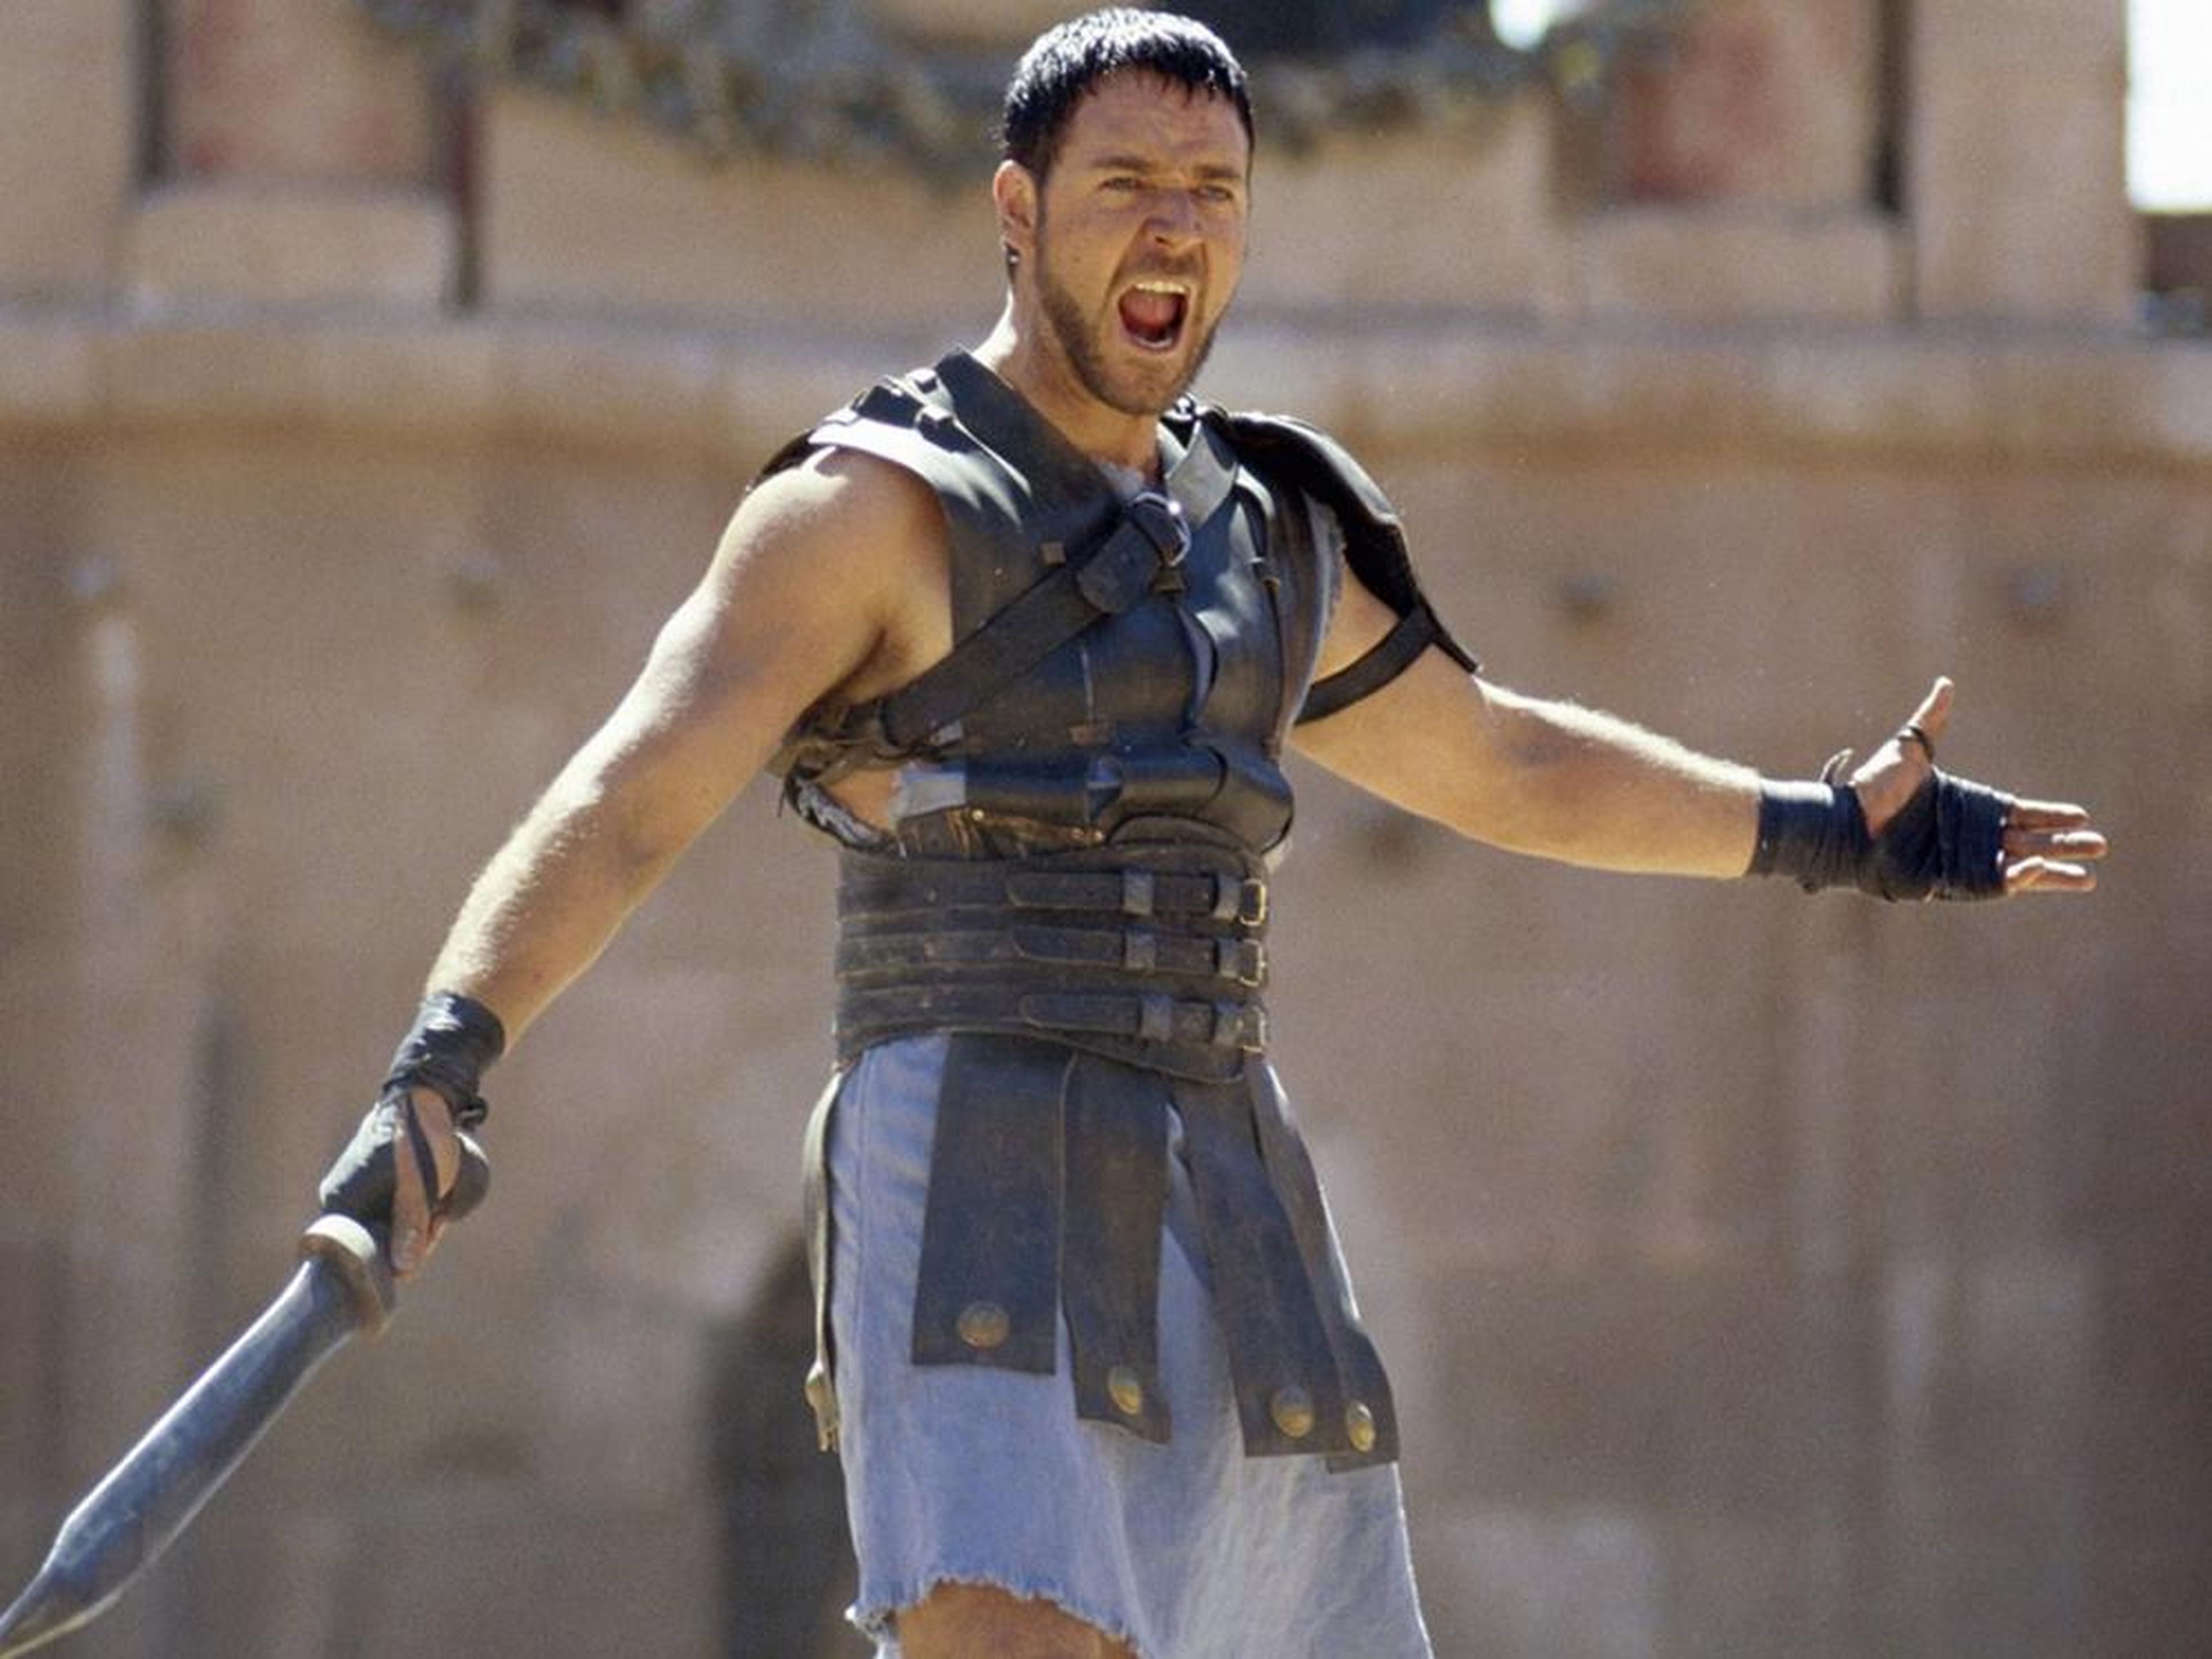 Russell Crowe in "Gladiator."